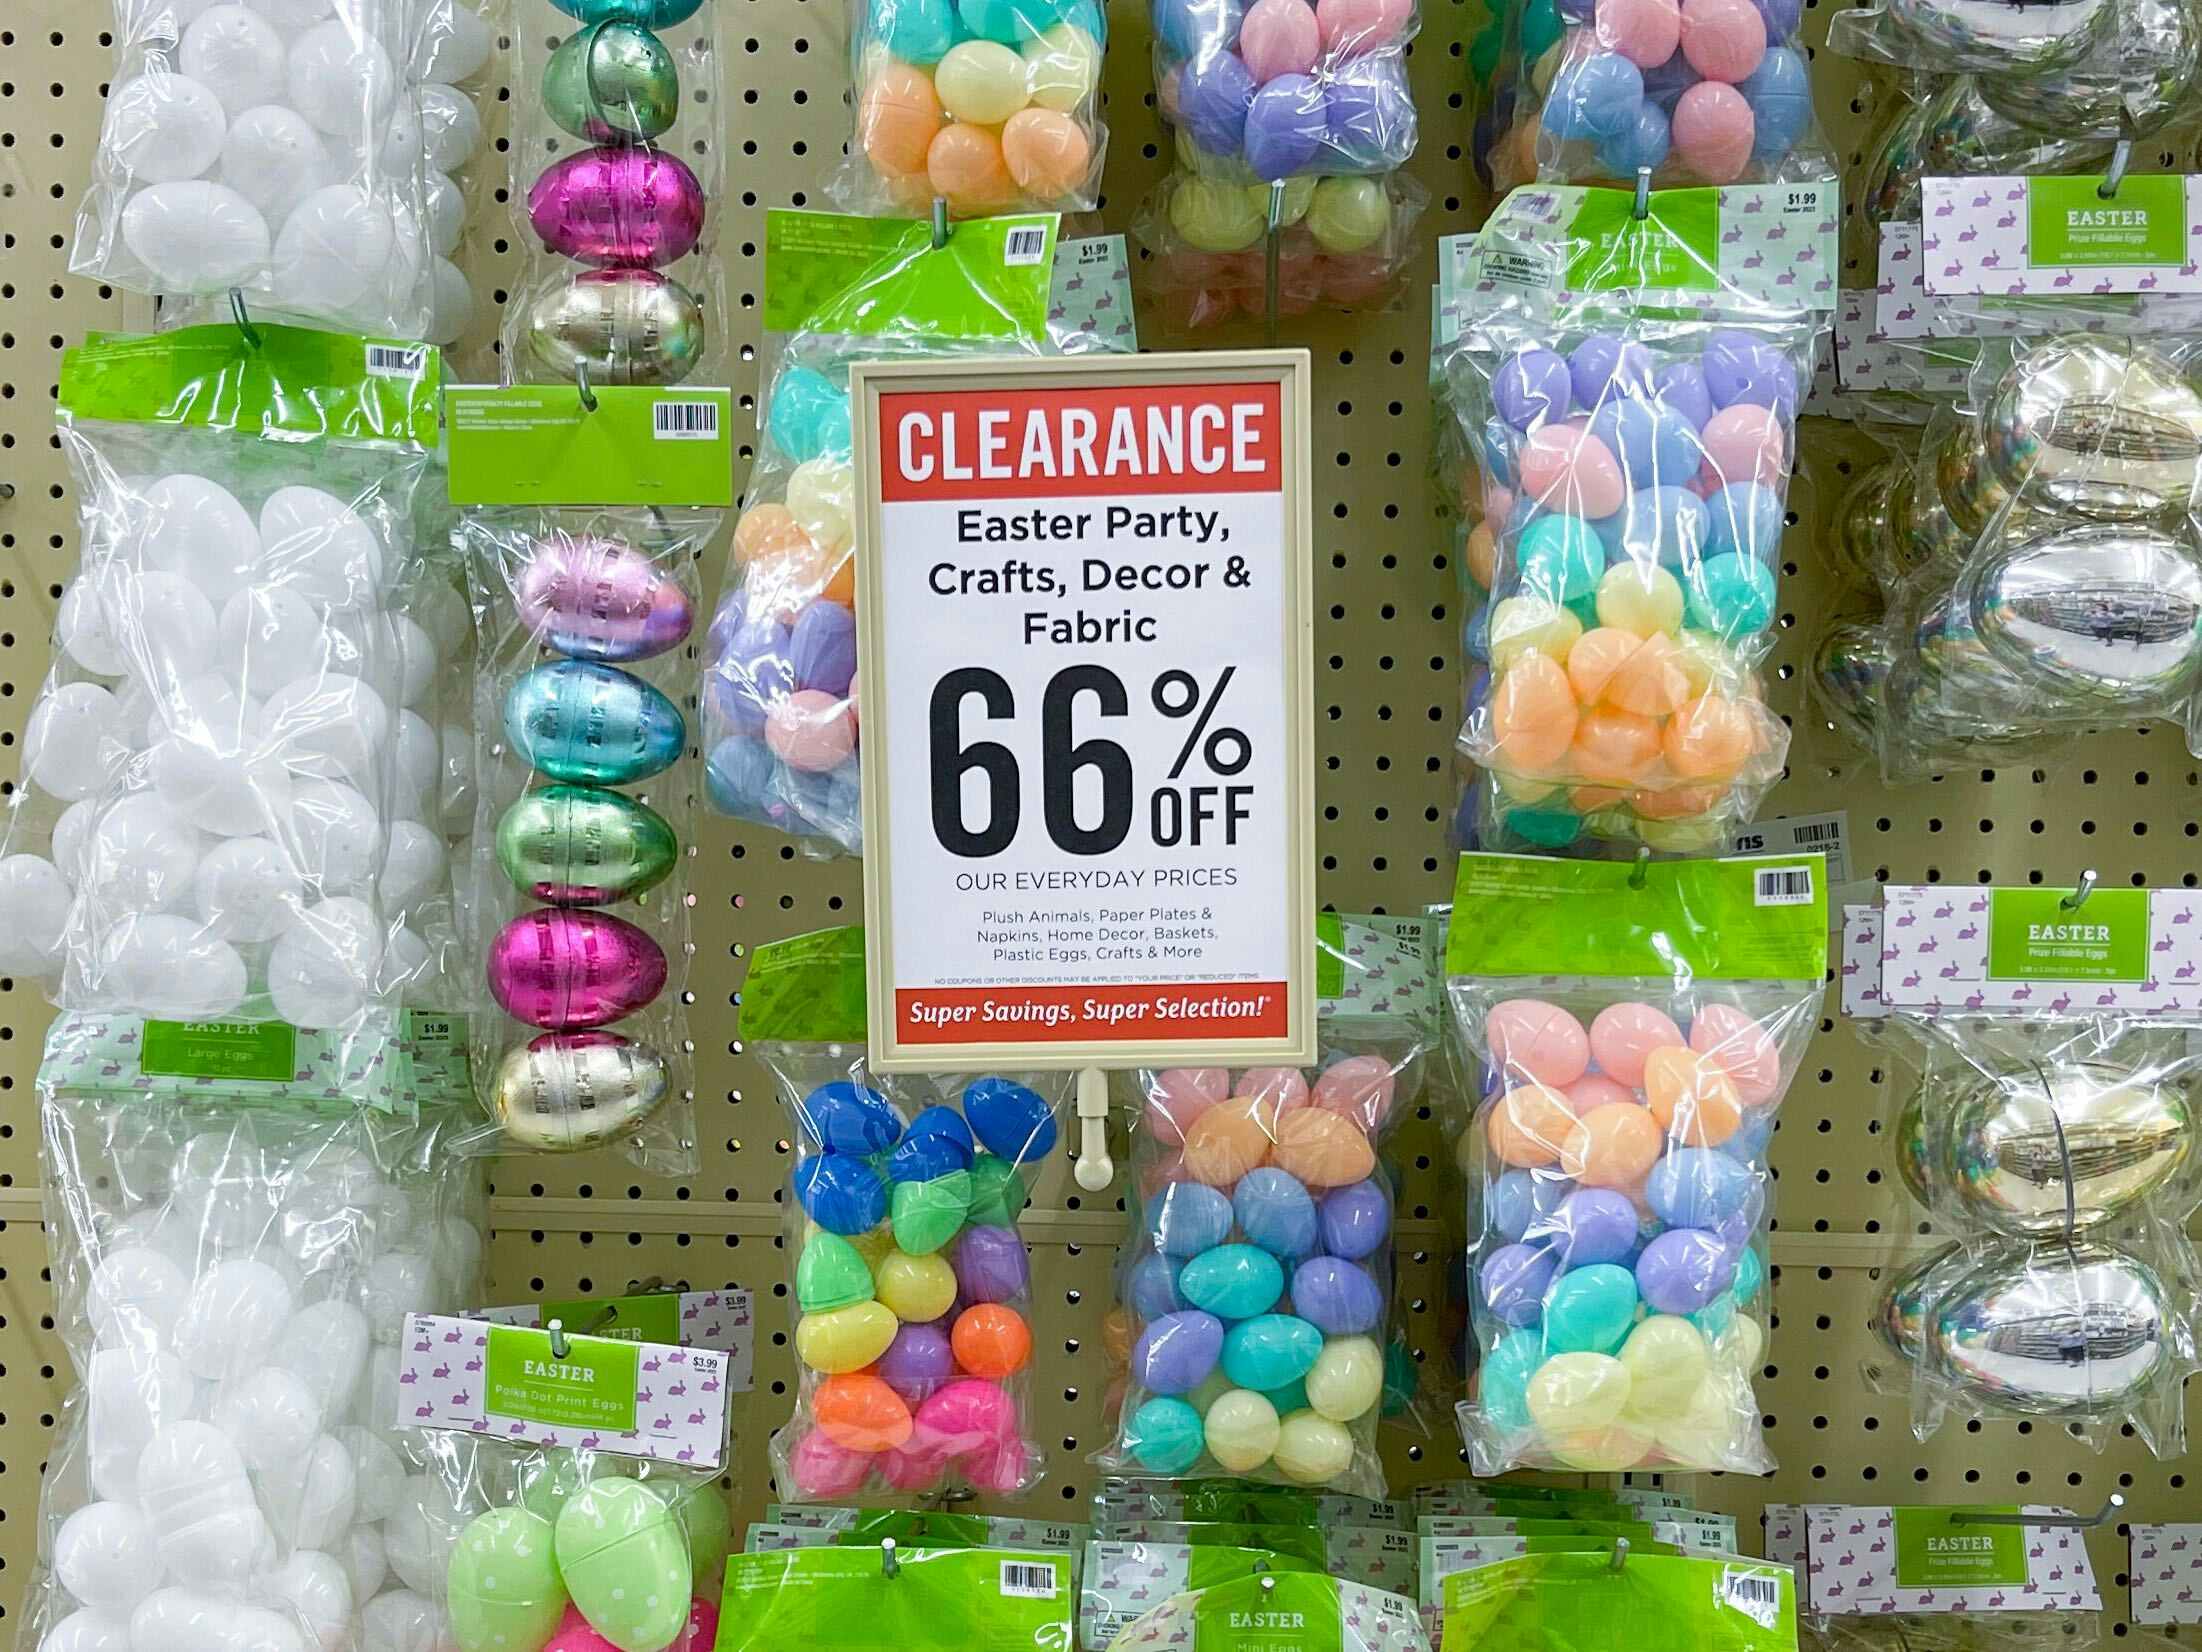 90% Off Easter Clearance at Hobby Lobby